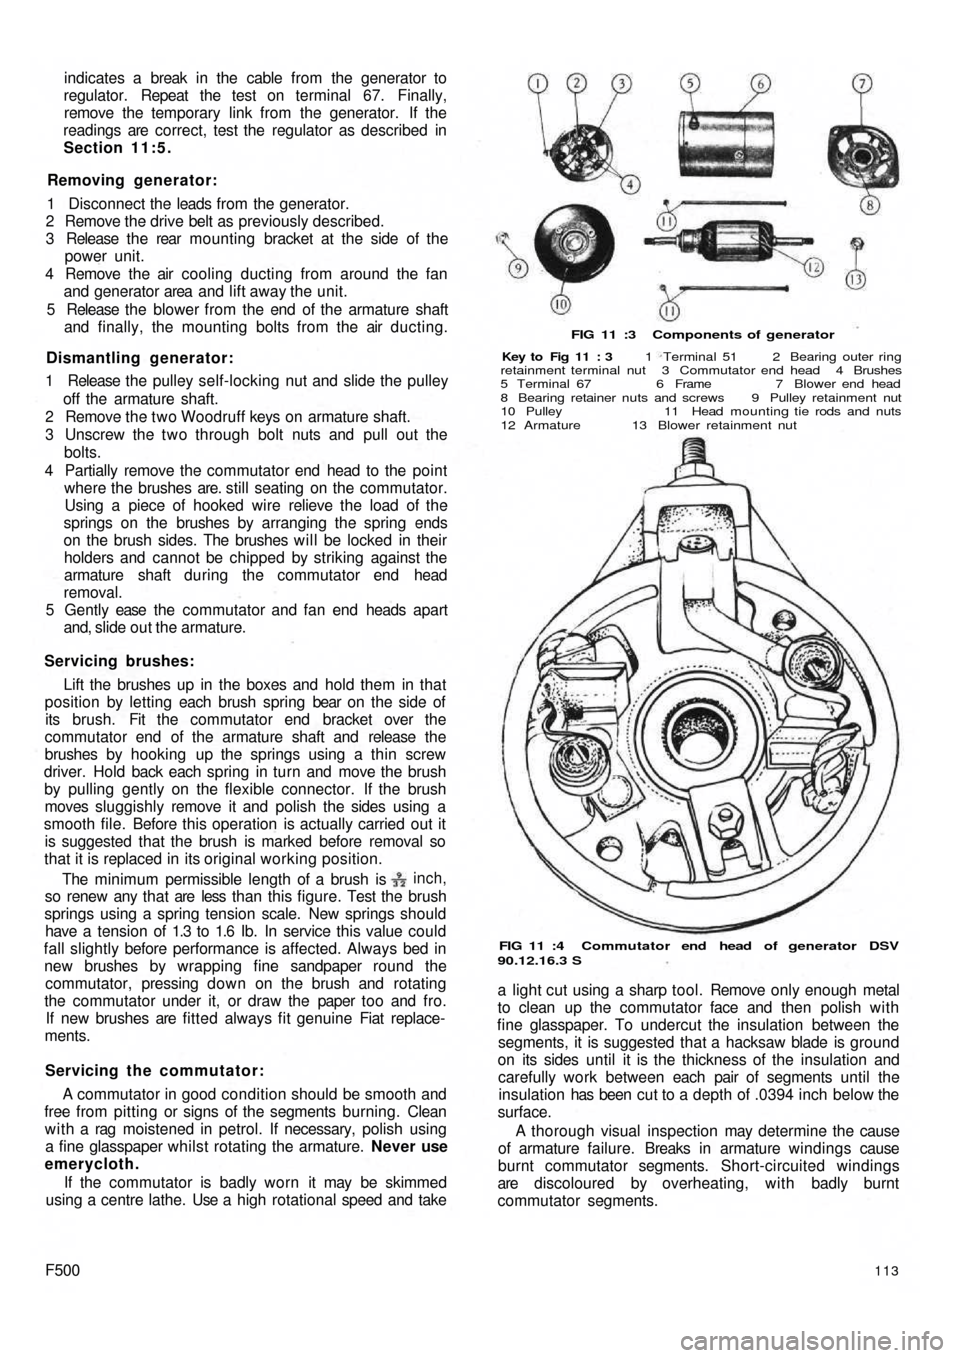 FIAT 500 1964 1.G Owners Manual indicates a  break in the cable from the generator to
regulator. Repeat the test on terminal 67.  Finally,
remove the temporary link from  the generator. If the
readings are correct, test the regulato